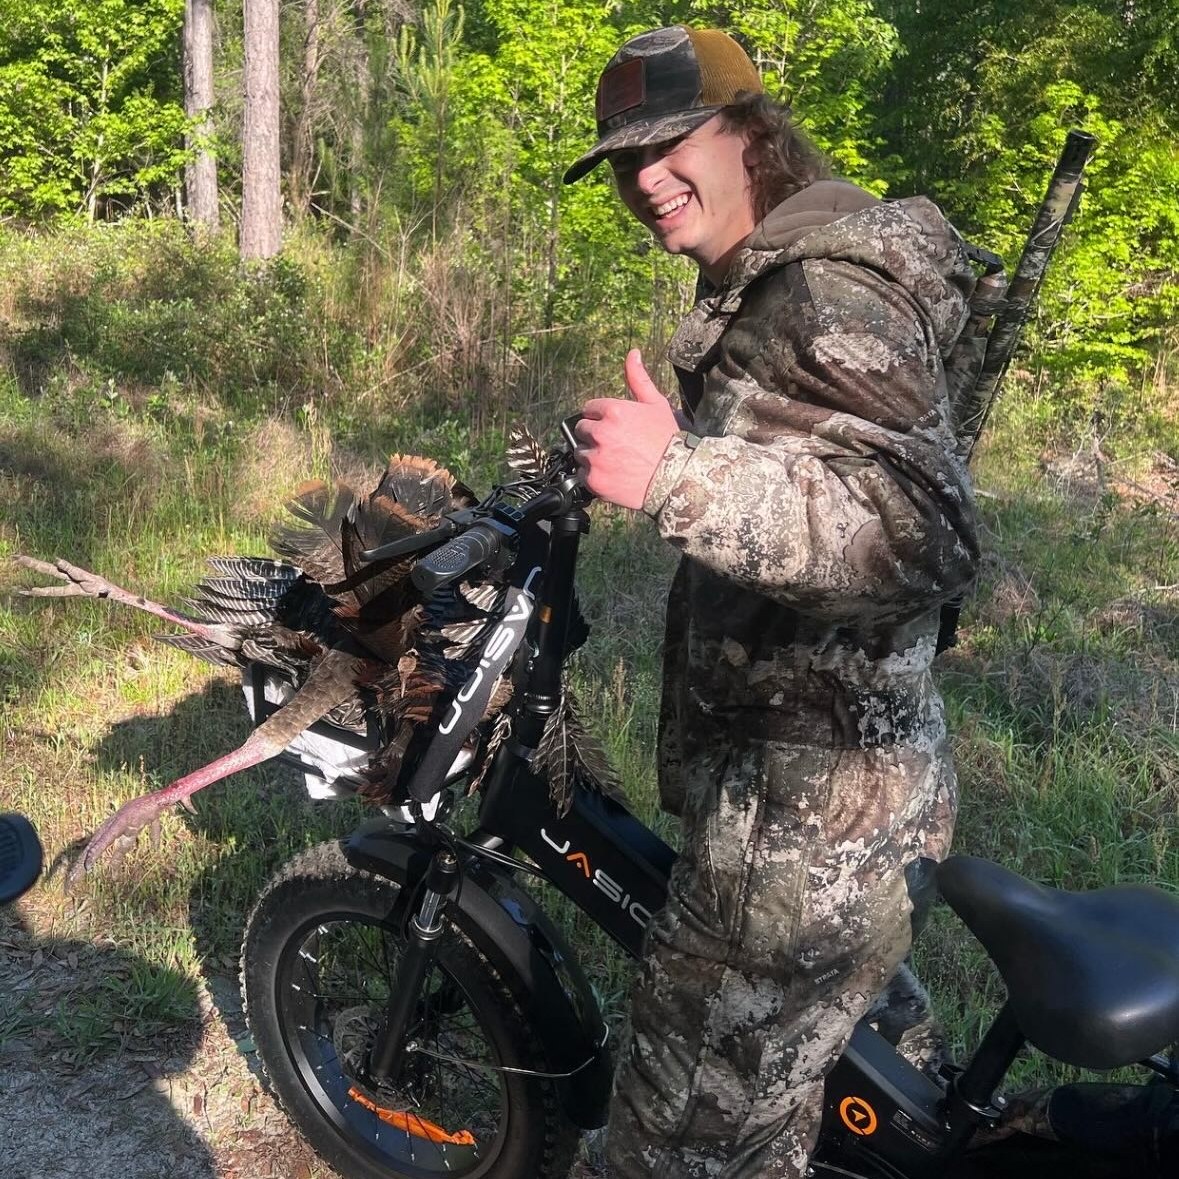 🚴‍♂️🌿 Embark on a Unique Hunting Journey on a JASION Electric Bike 🏹🌄
Grab your bow and arrows, hop on a JASION electric bike, and kickstart an exhilarating hunting adventure! 

#jasionbike
#jasionxhunter
#jasioneb7
#jasioneb7st
#Hunting
#ExploringNature
#OutdoorAdventure